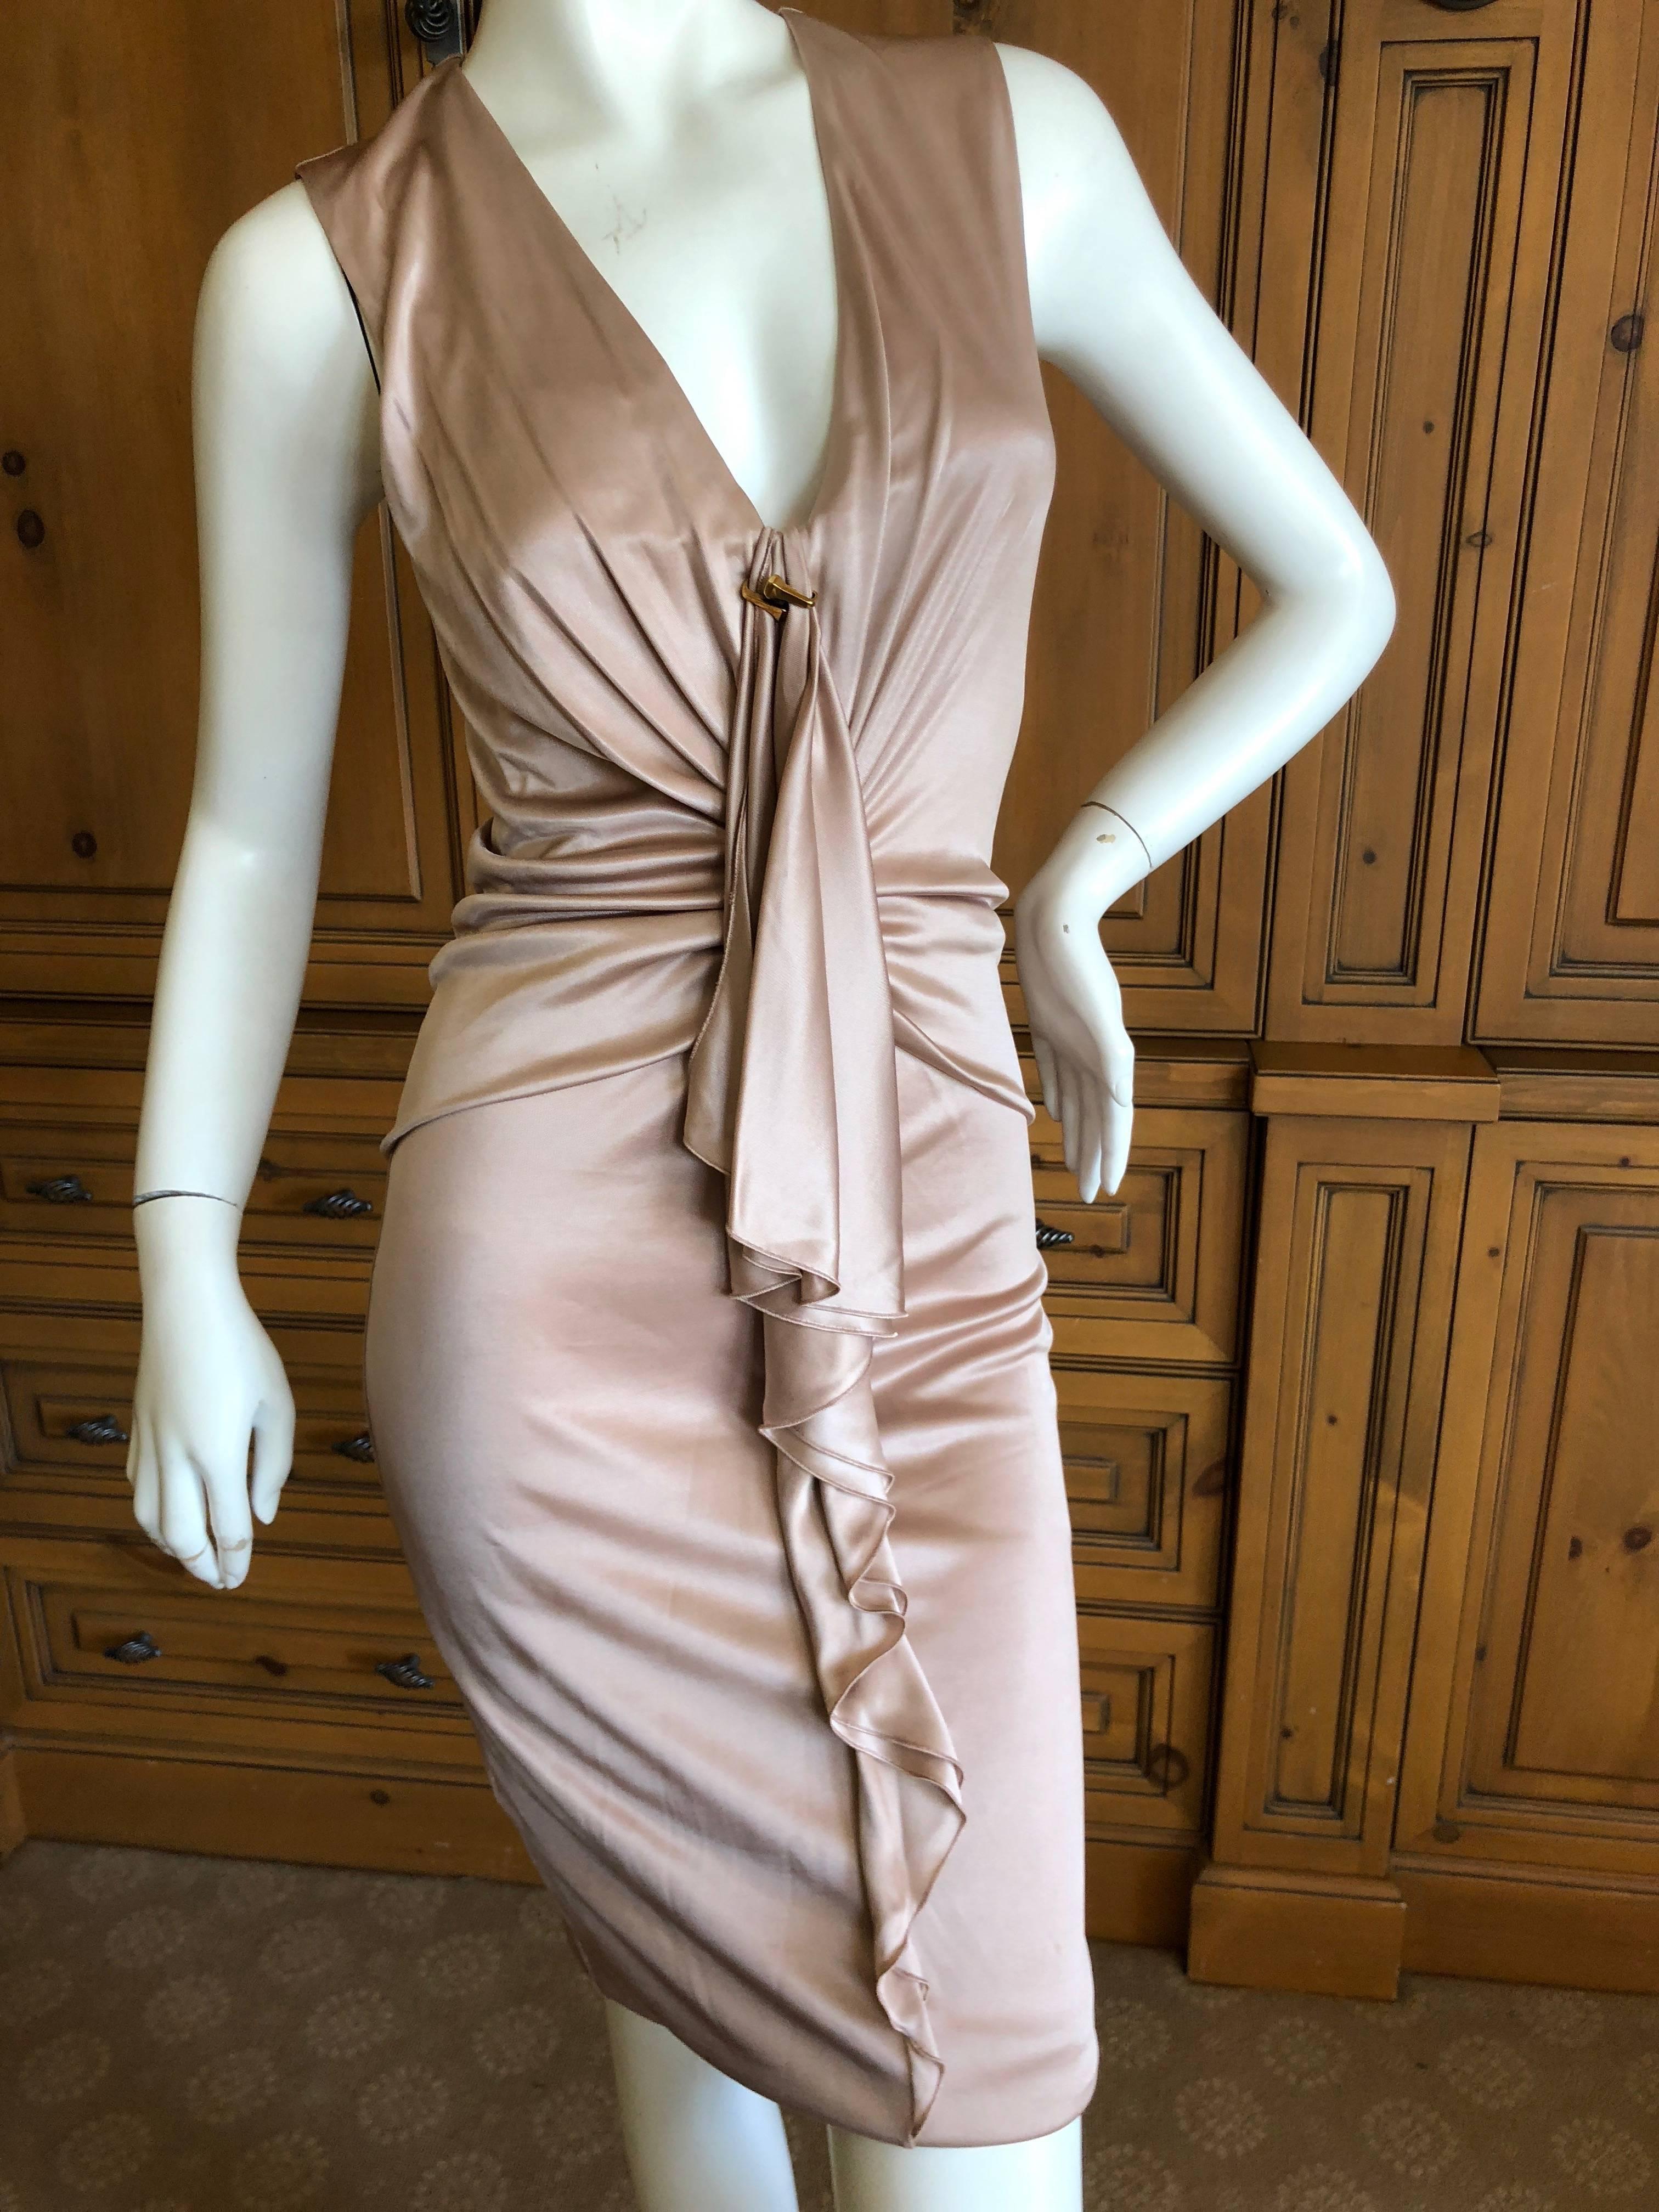 Gucci by Tom Ford Gold Gathered Sleeveless Cocktail Dress.
The color is hard to describe, like rose gold
So sexy on, prettier than the photos reveal.
Size M
Bust 38